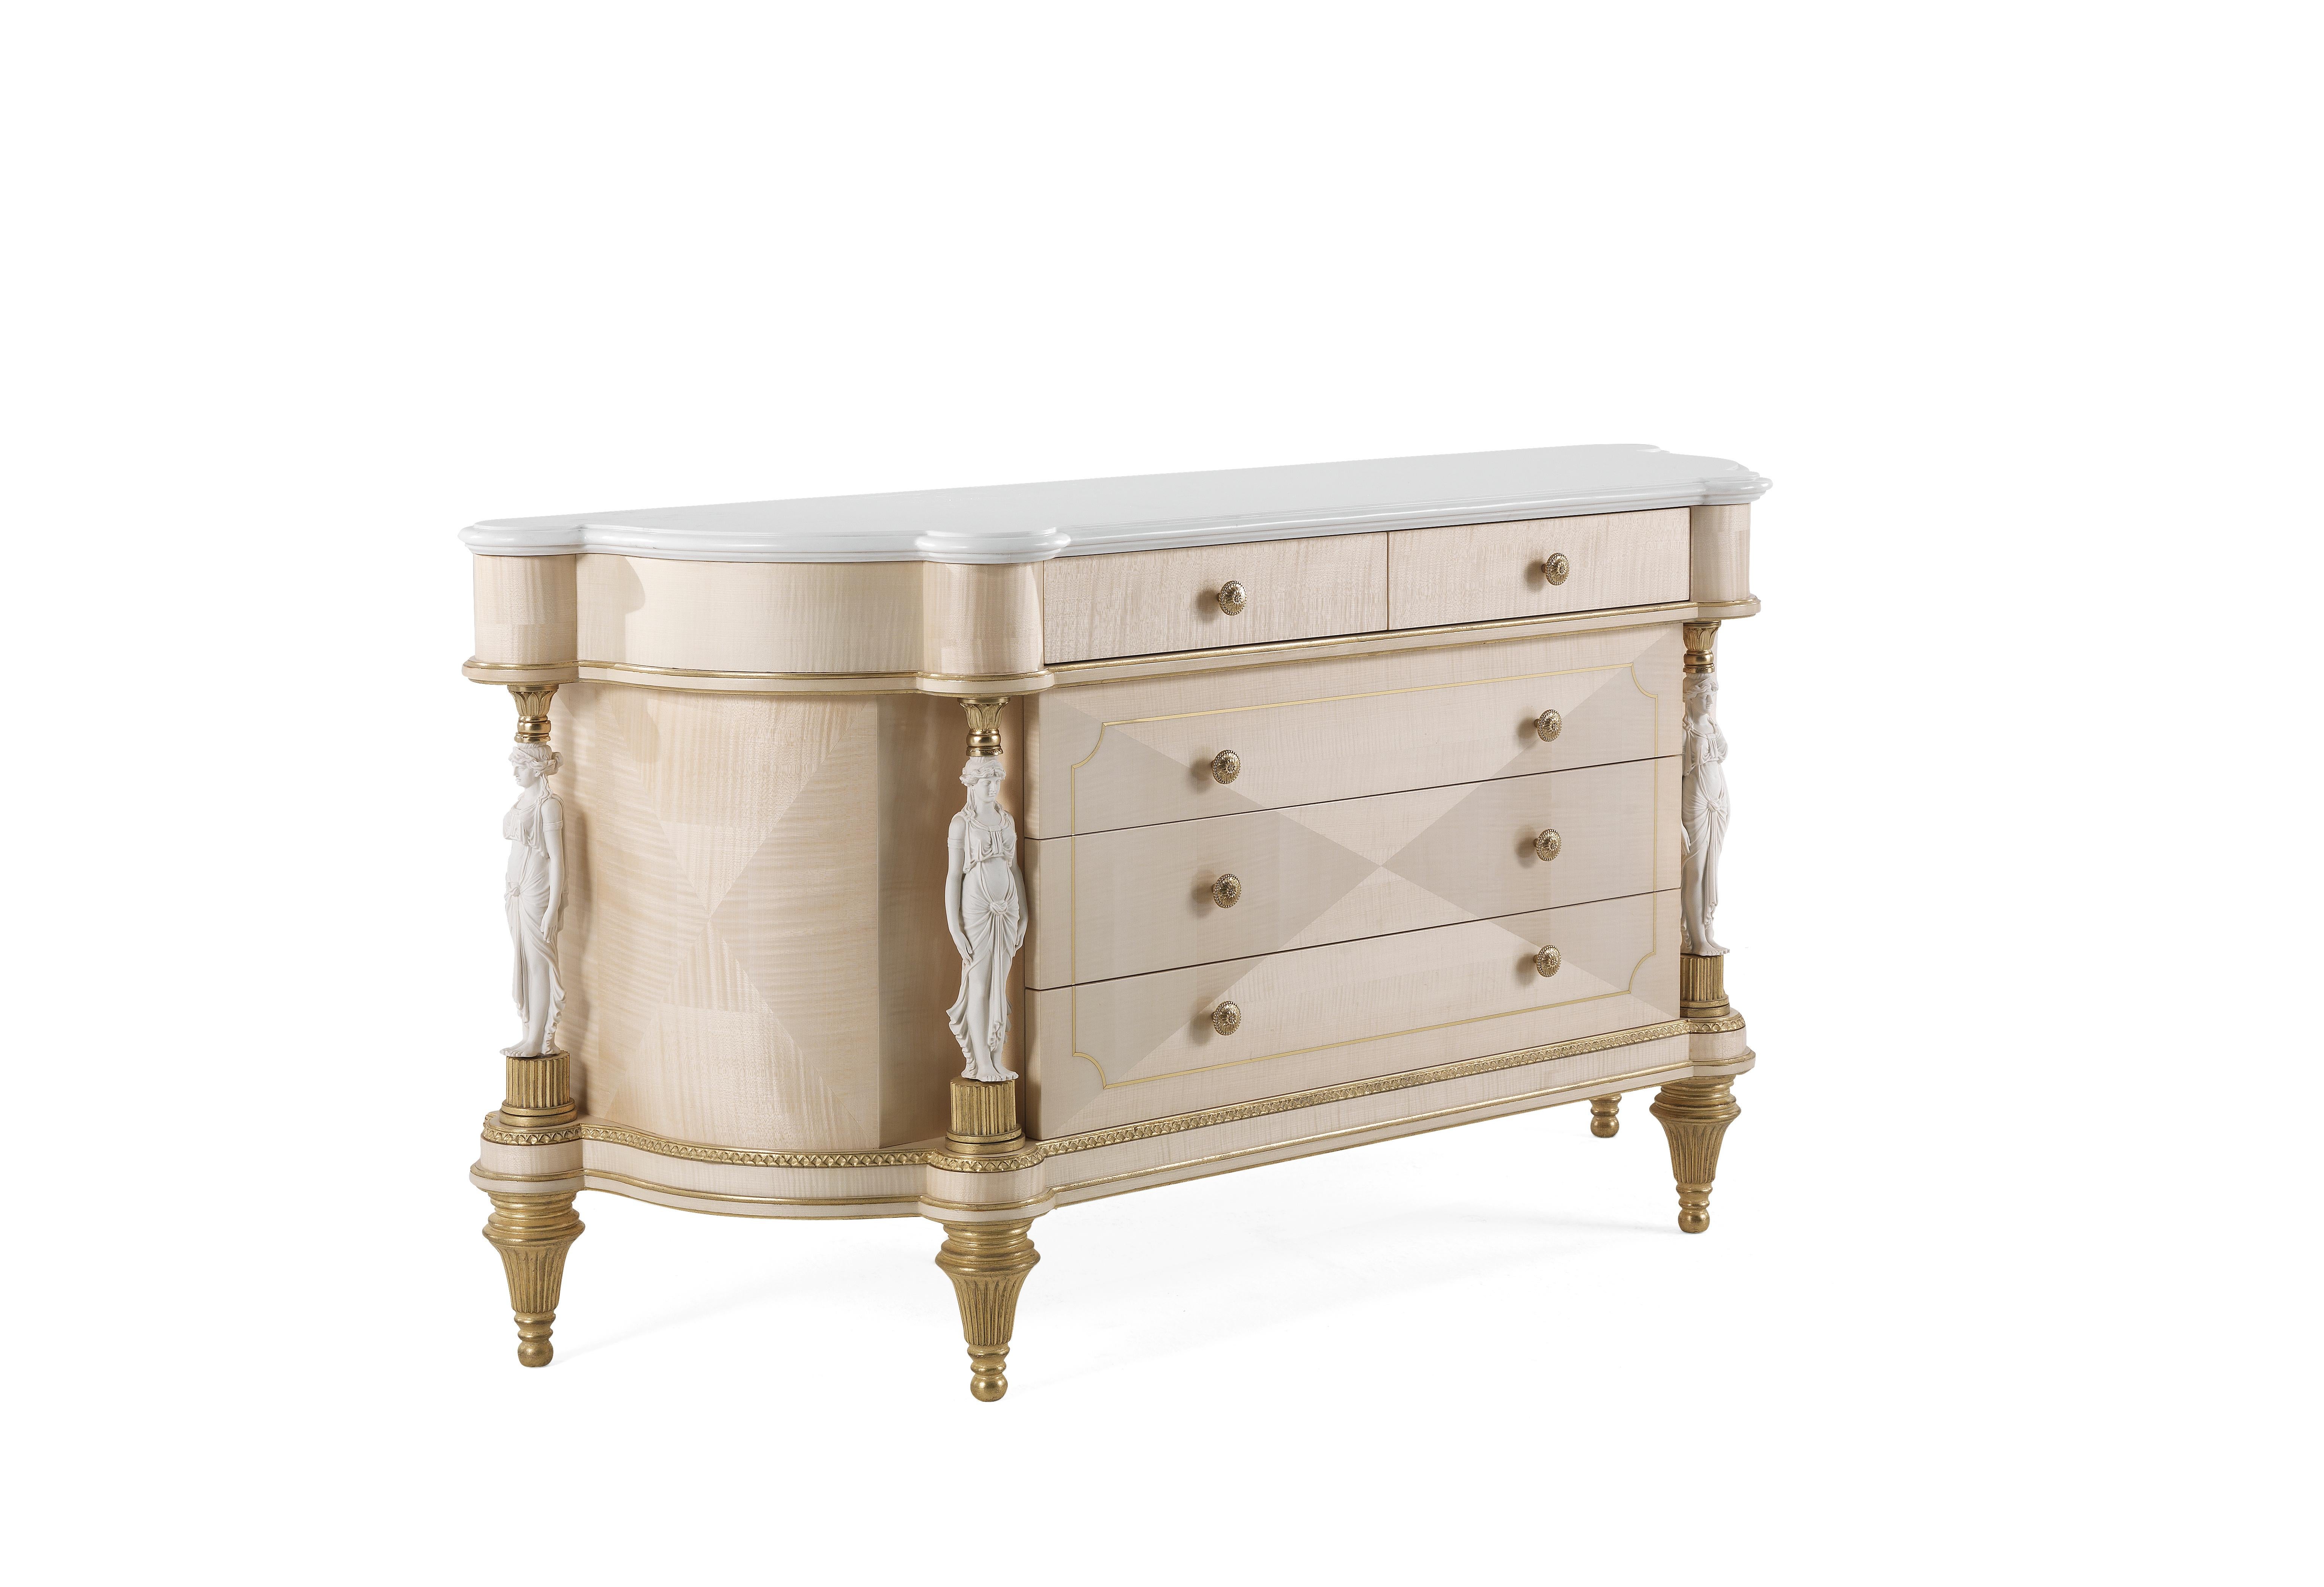 Toulouse chest of drawers with structure in multilayer maple. Five drawers. Profile and details are finished in antique gold with patina JG294. Decorative elements in metal are finished in gold. Statues with biscuit finishing as columns. Top in